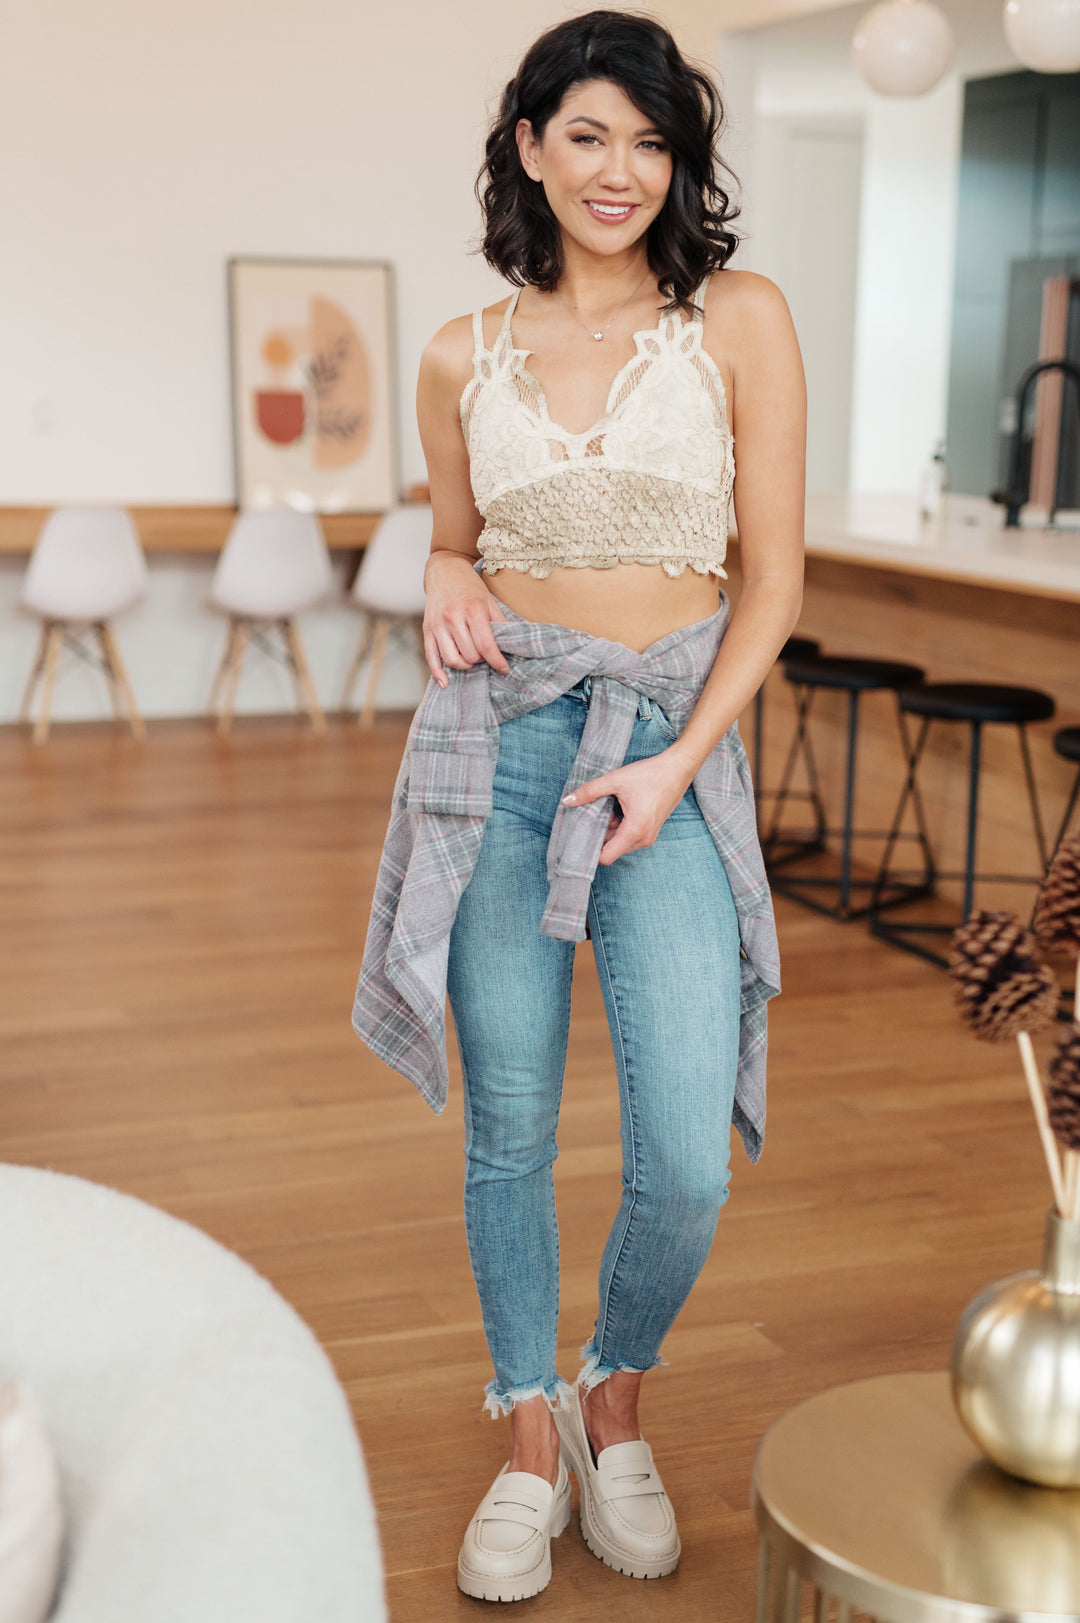 Live In Lace Bralette in Taupe-Bralettes-Inspired by Justeen-Women's Clothing Boutique in Chicago, Illinois